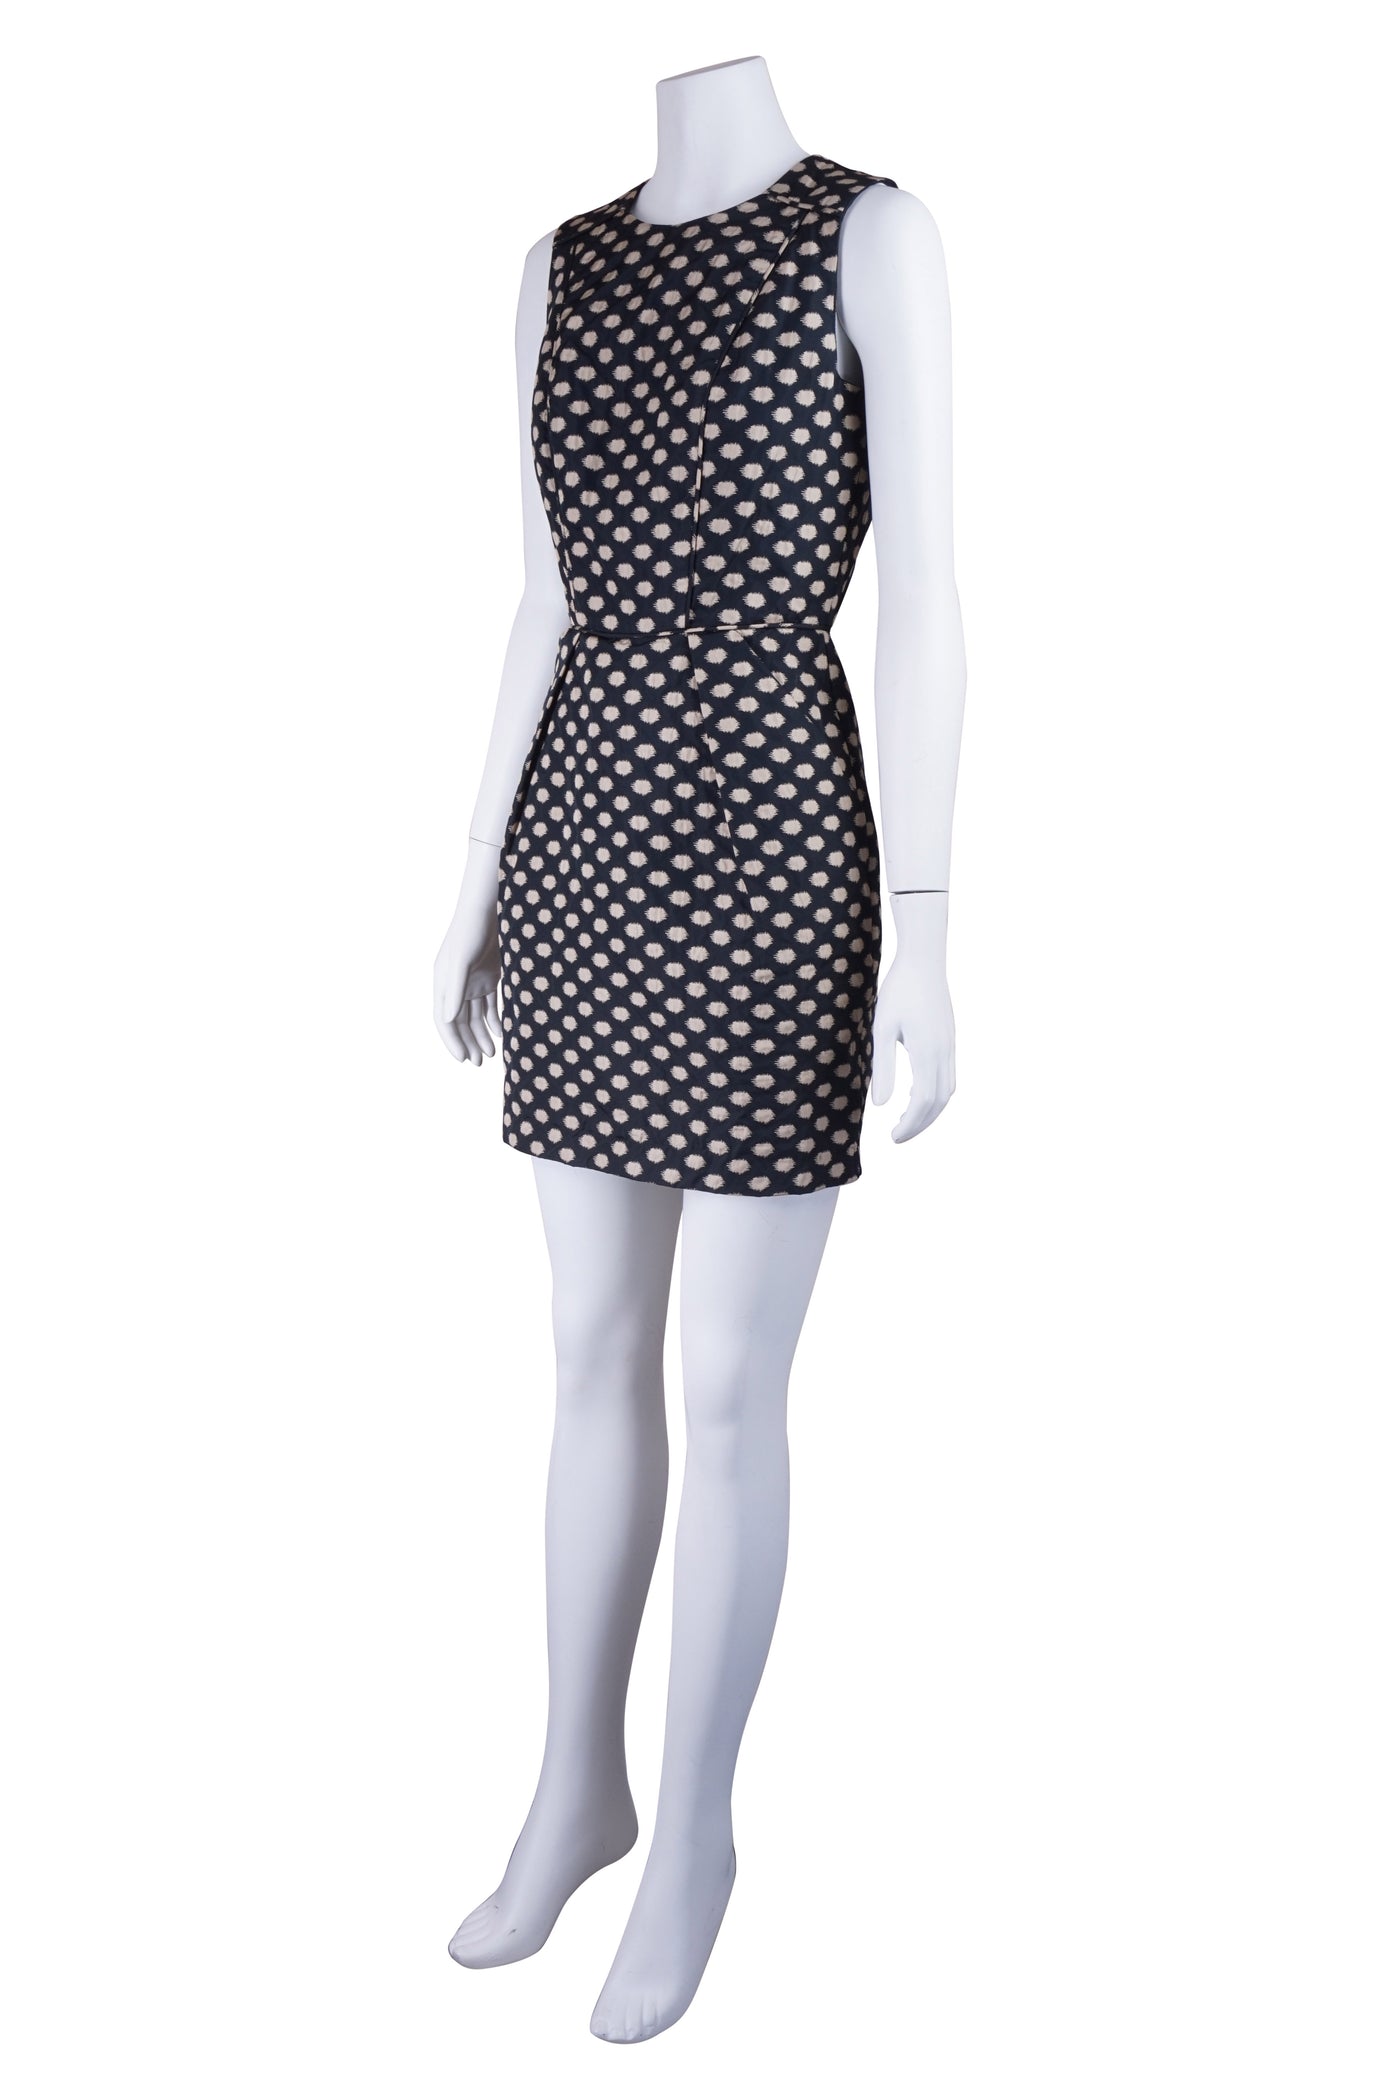 Intropia Black spotted dress